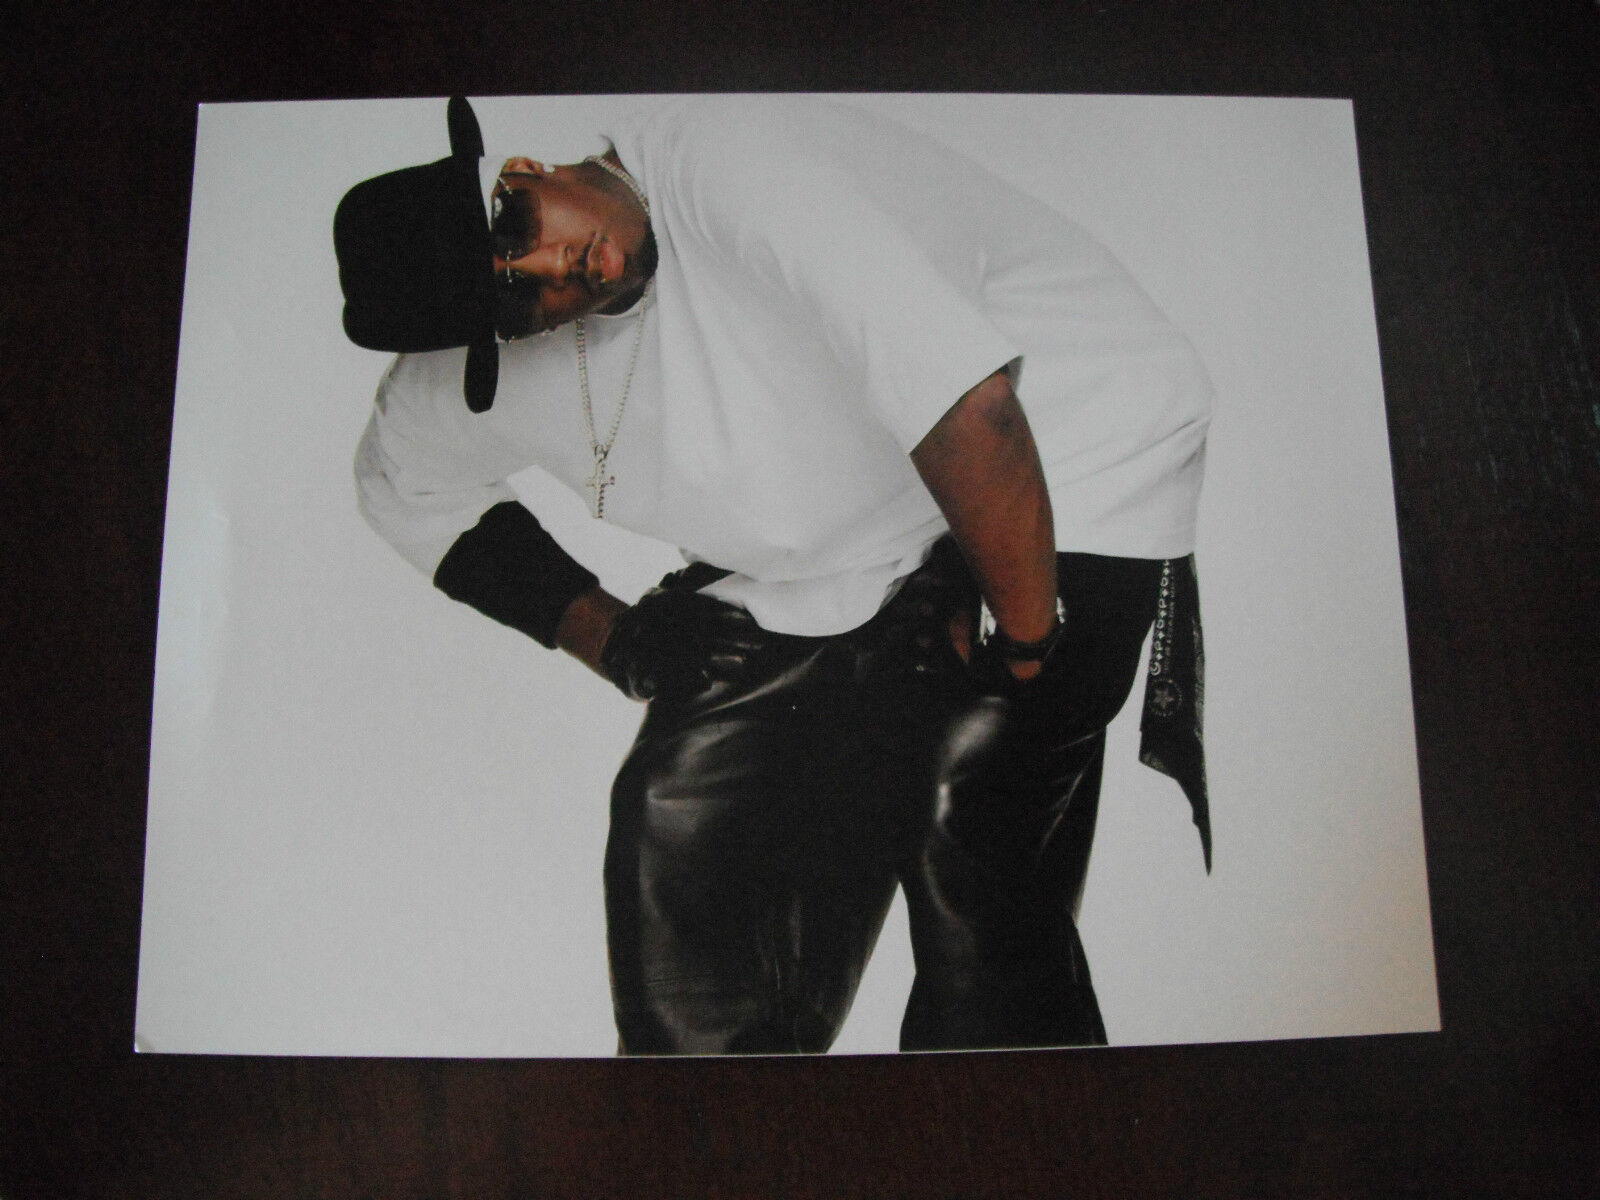 Sean Combs Puff Daddy P Diddy Puffy Diddy Rapper Actor Color 11x14 Promo Photo Poster painting